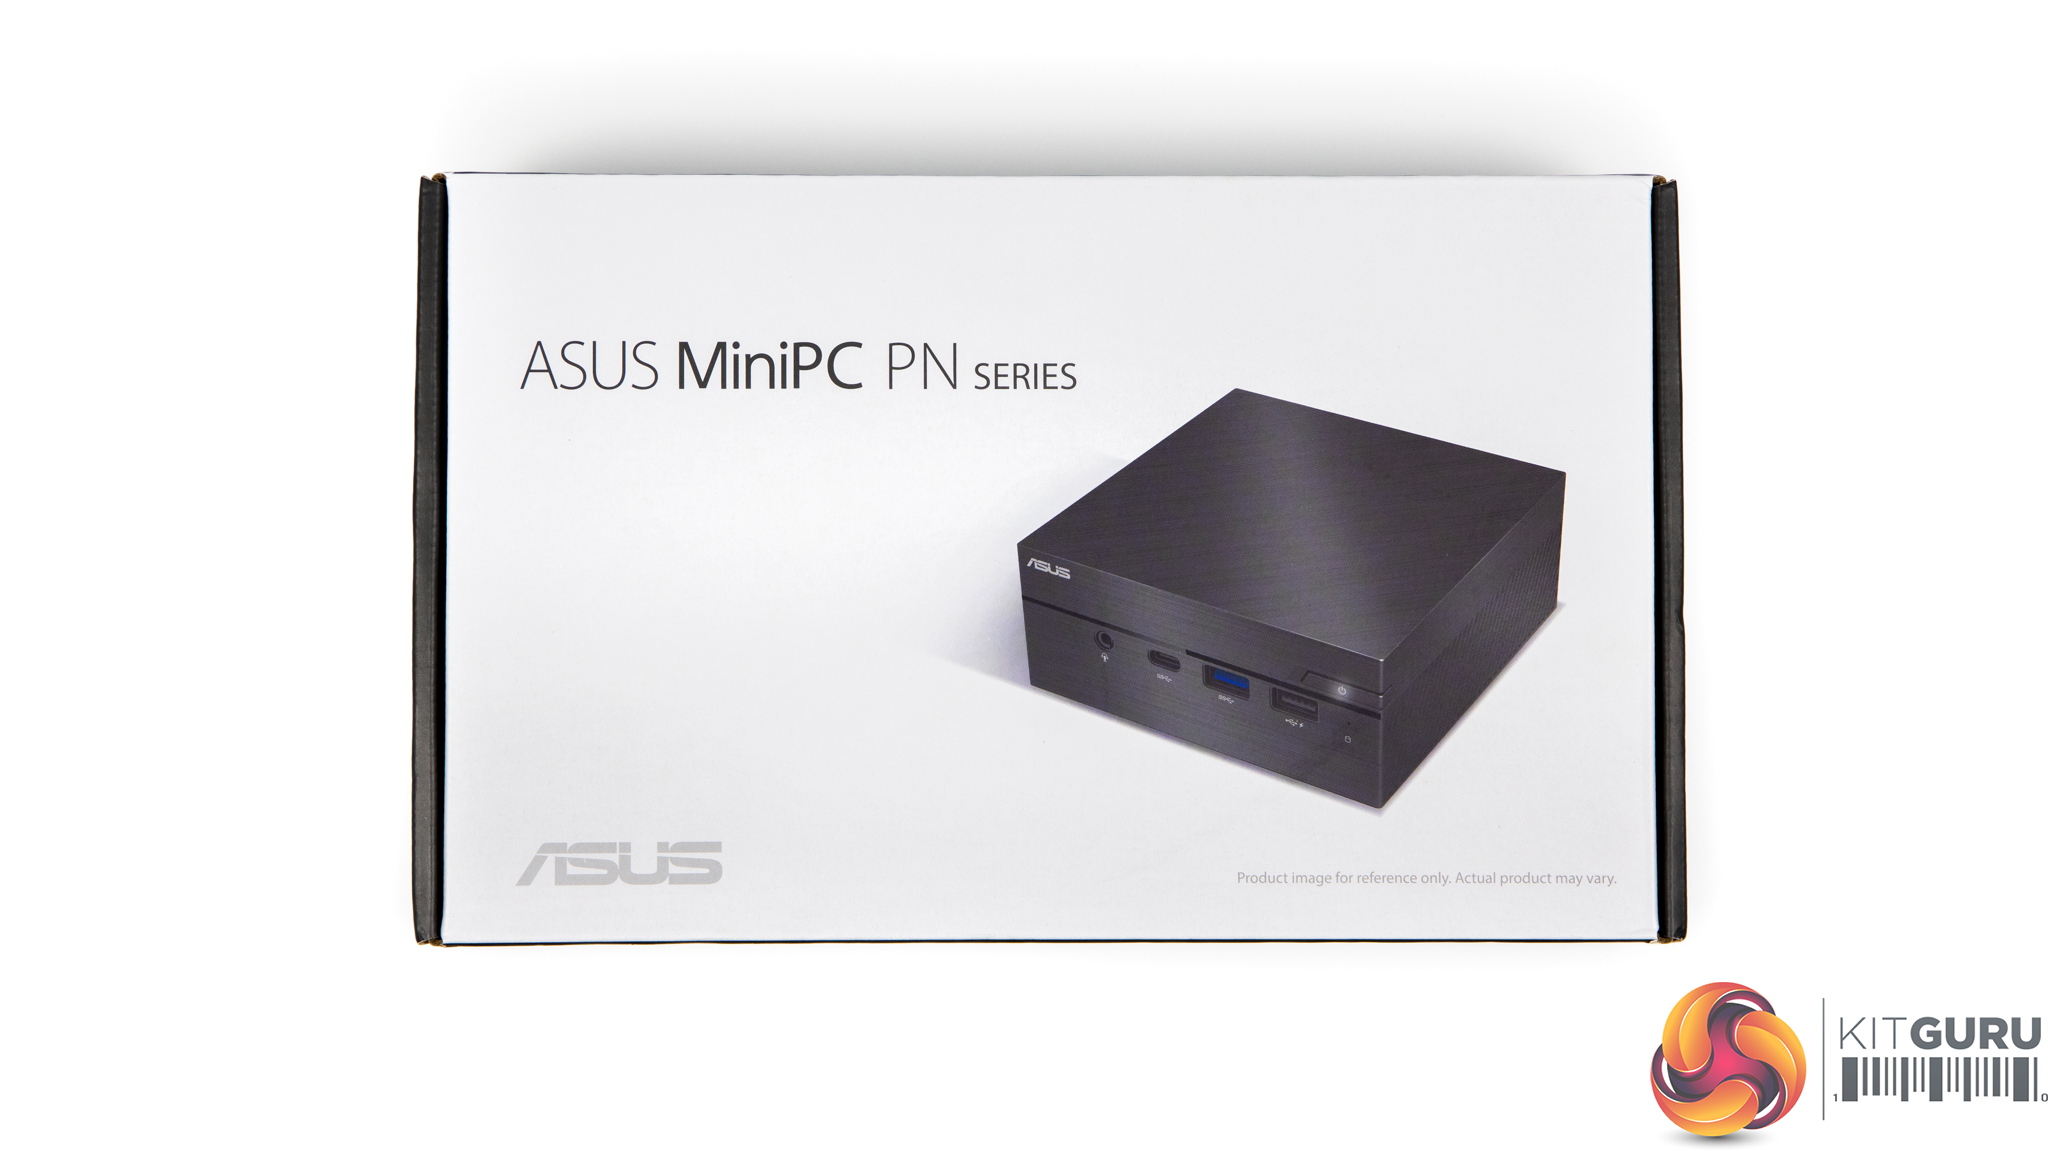 ASUS PN51 Mini PC review: This AMD-powered compact workstation is